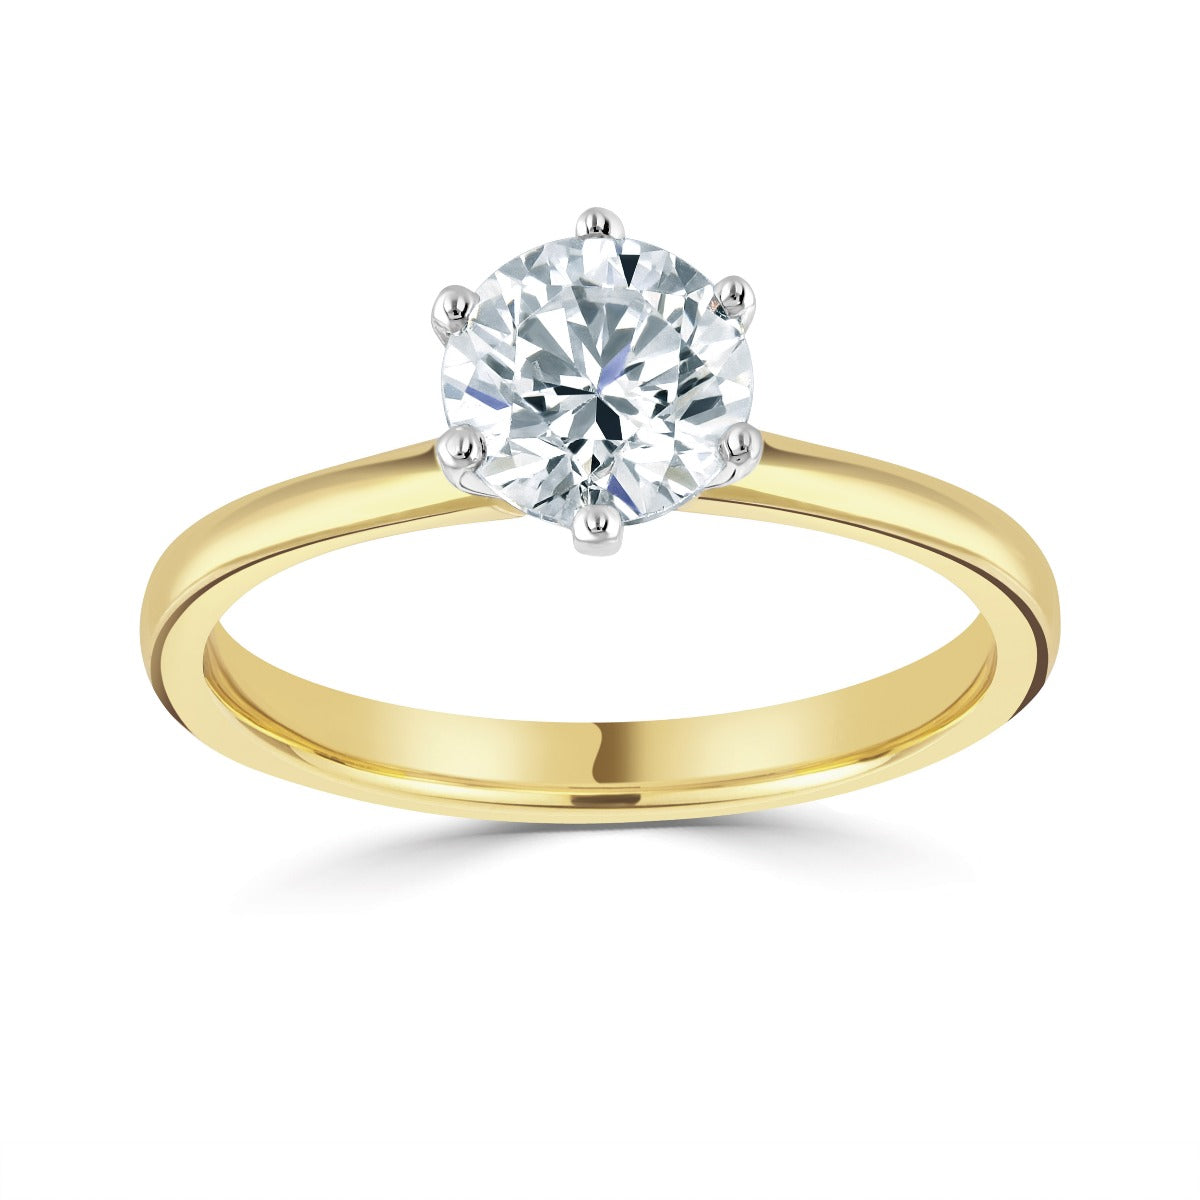 The Daffodil 18ct Yellow Gold And Platinum Round Brilliant Cut Diamond Solitaire Engagement Ring